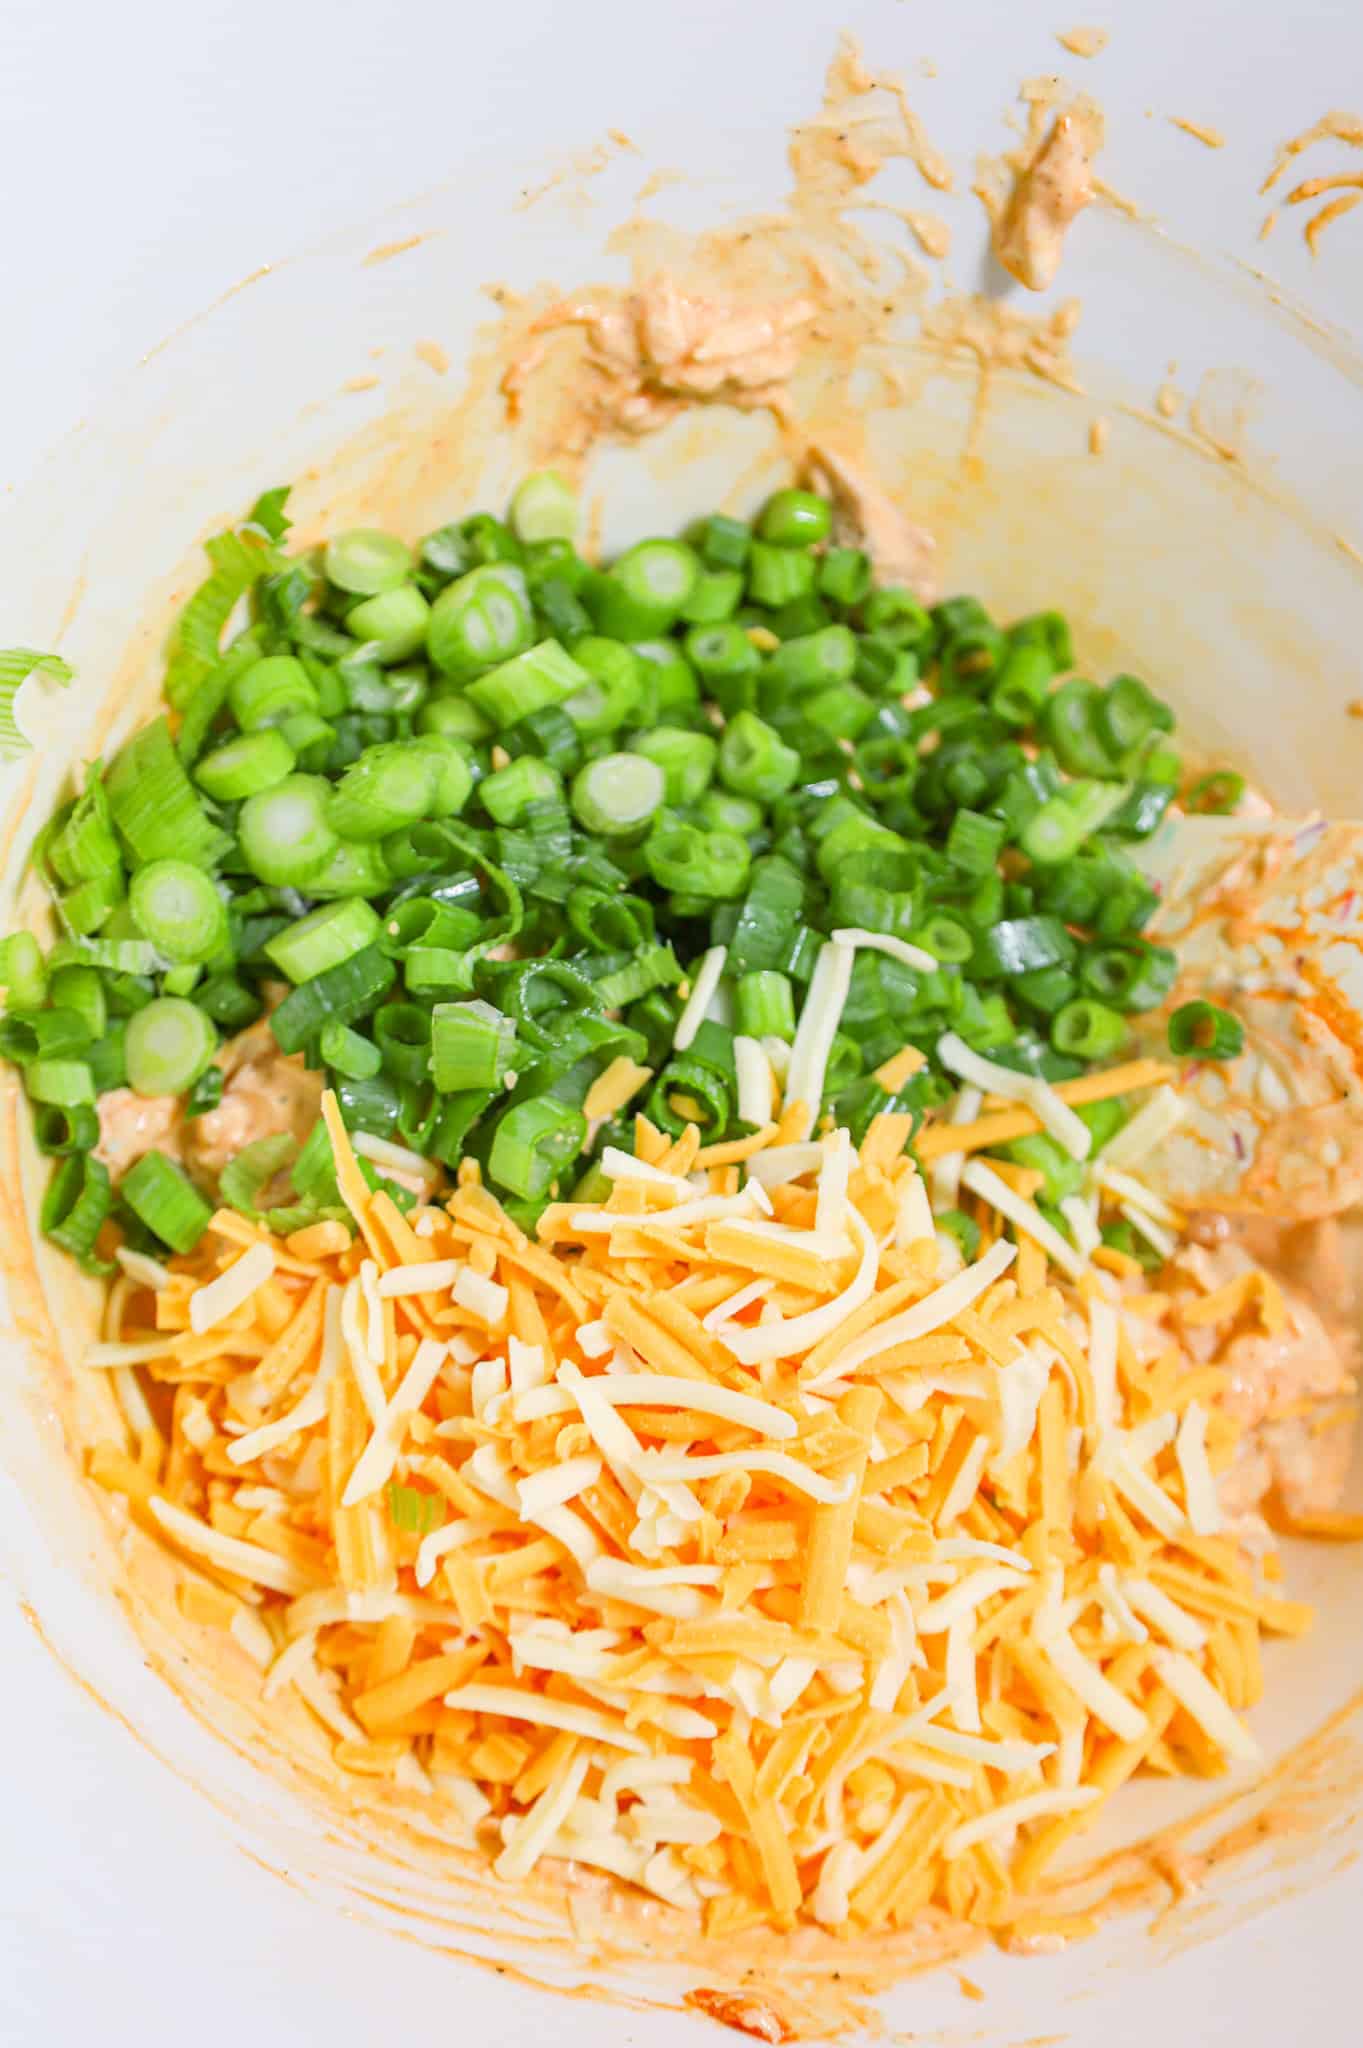 chopped green onions and shredded cheddar cheese on top of buffalo chicken mixture in a mixing bowl